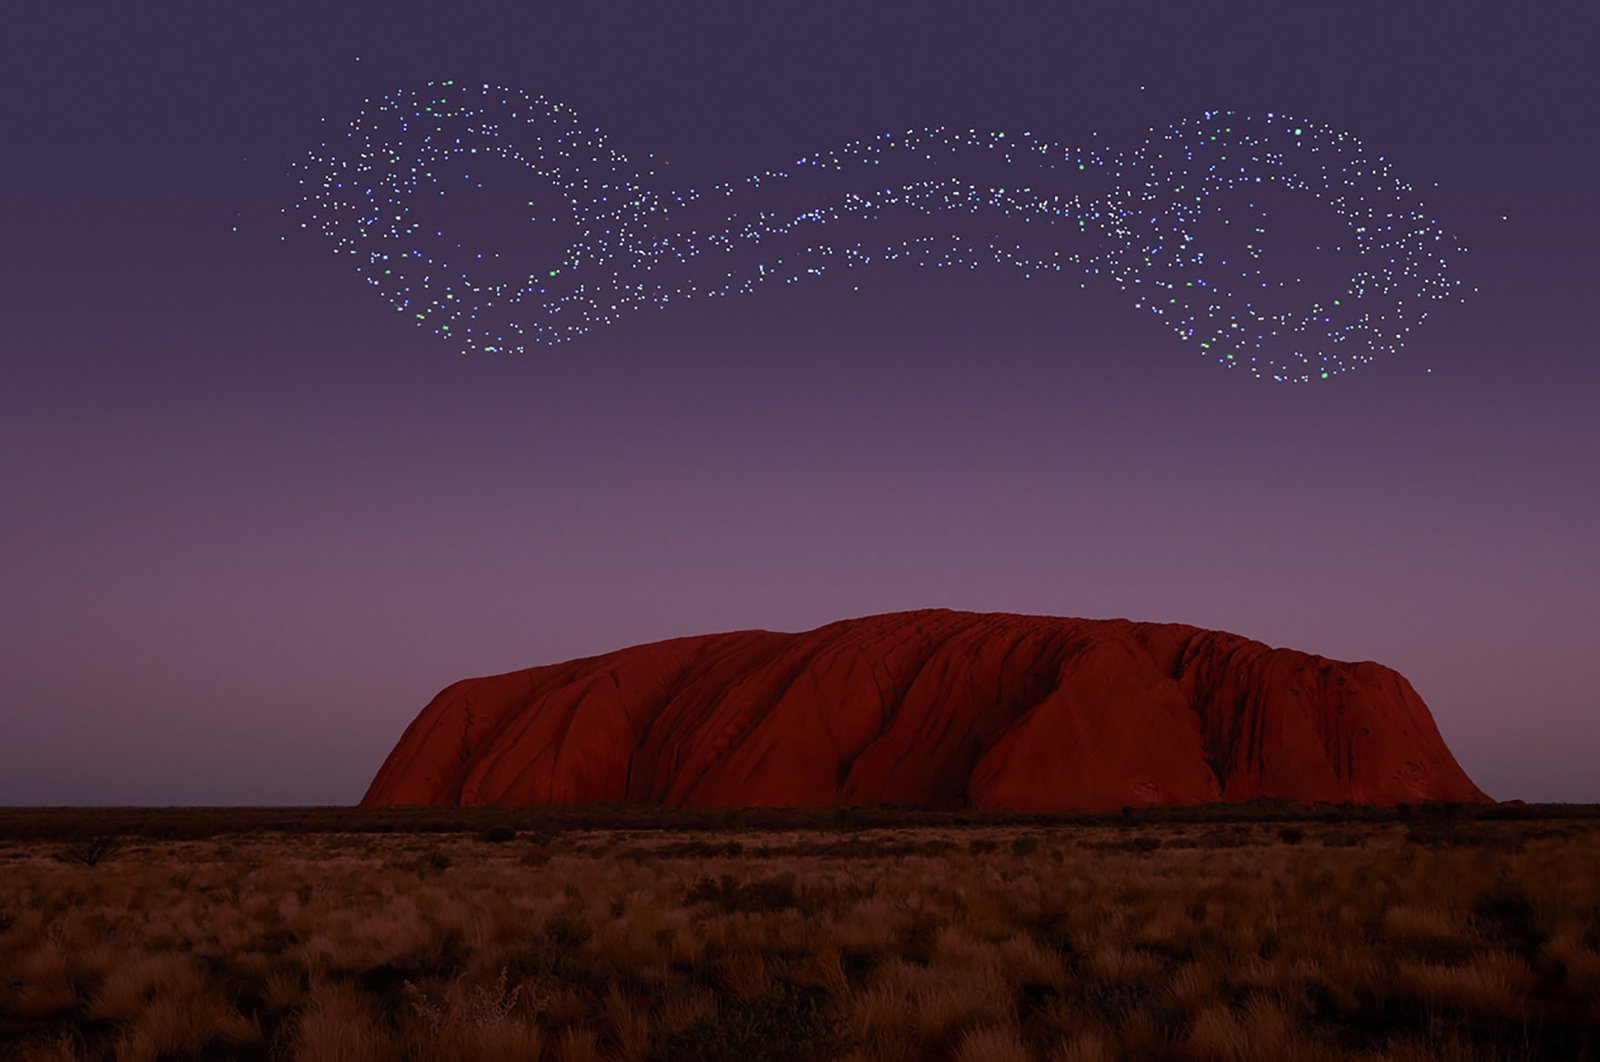 Every night from May onwards, drones are set light up the Australian outback with a laser show telling the stories of the Anangu Aborigines, Uluru, Australia, Feb. 3, 2023. (dpa Photo)